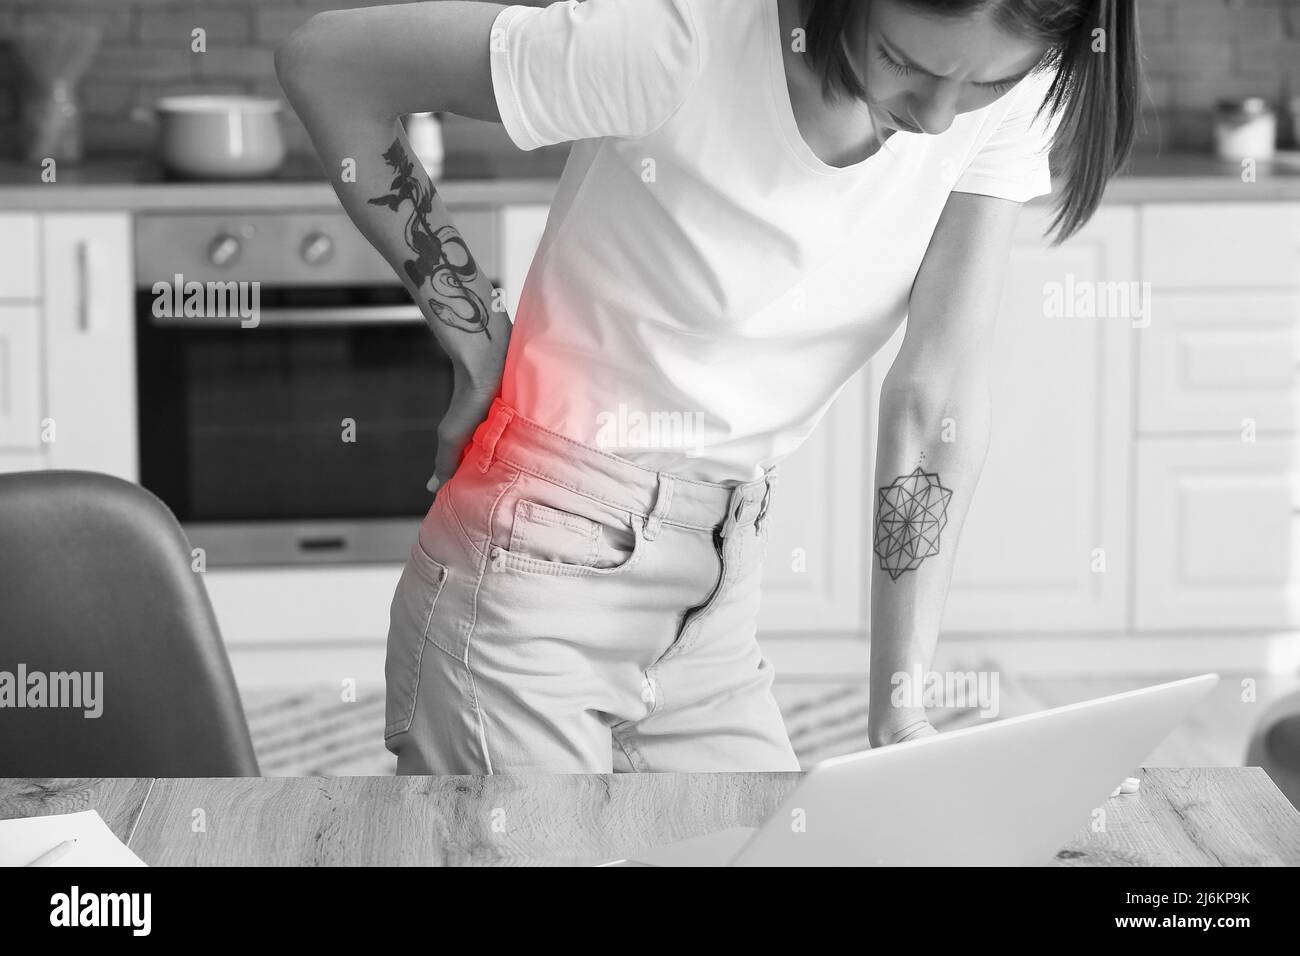 Young woman feeling back pain in kitchen Stock Photo